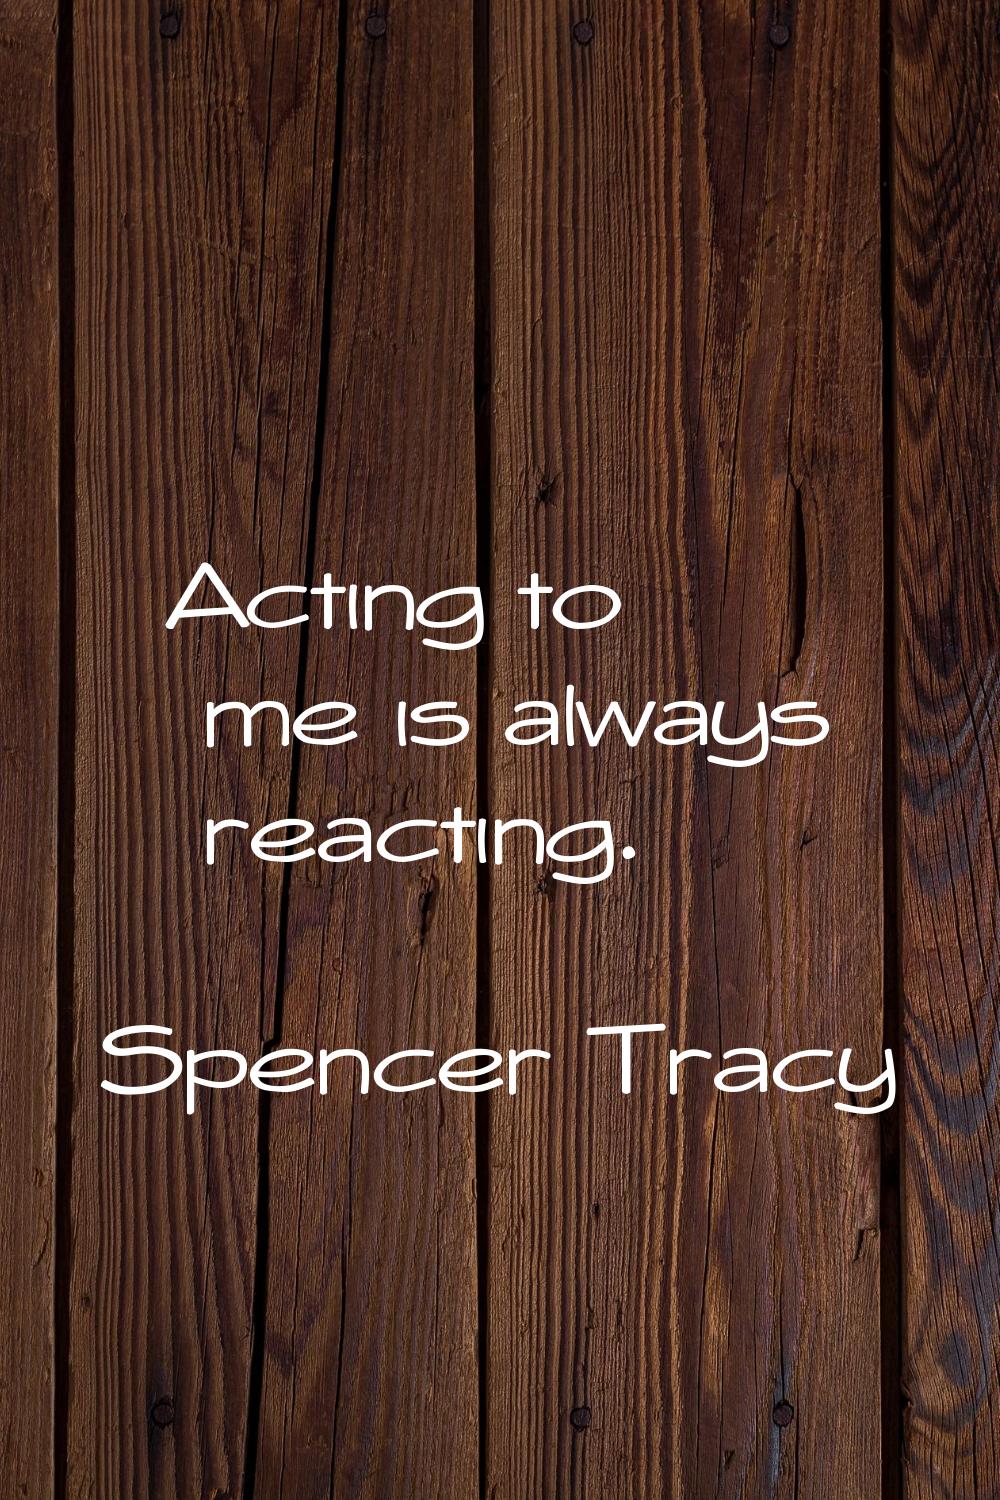 Acting to me is always reacting.